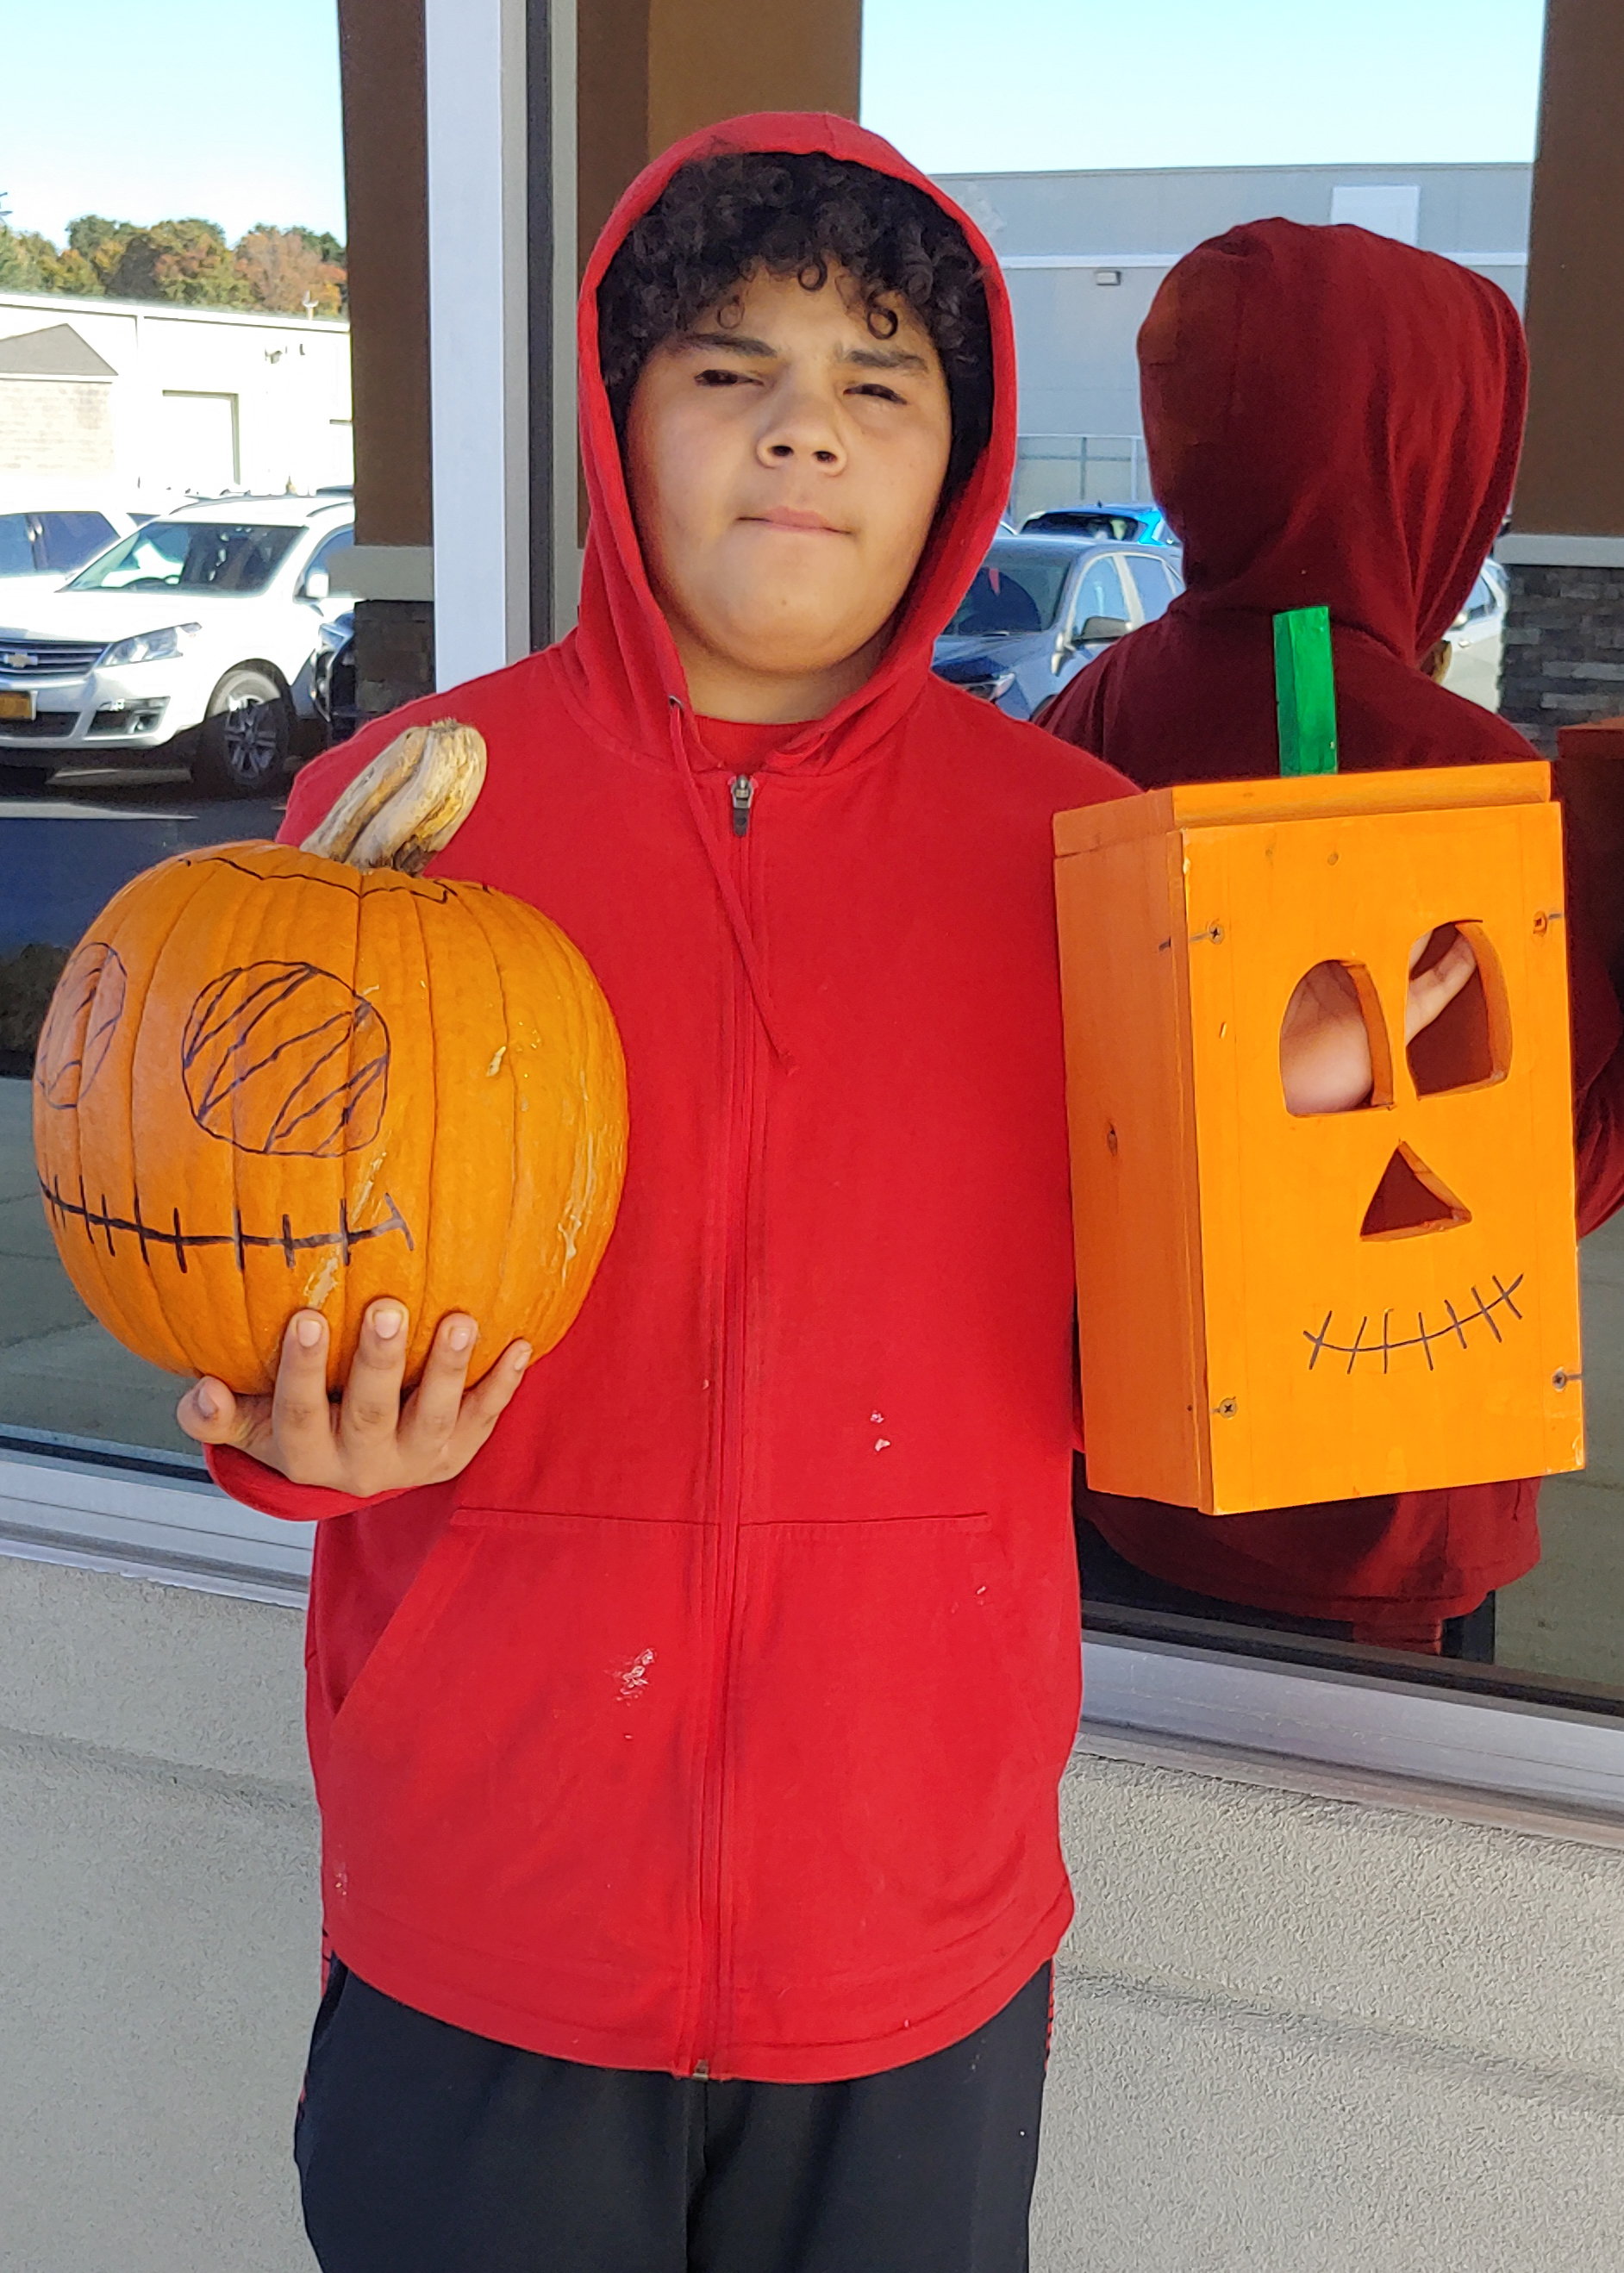 First-time carpenter Emanuel rose to the challenge, with an actual pumpkin decorated to match his carefully crafted wooden version.